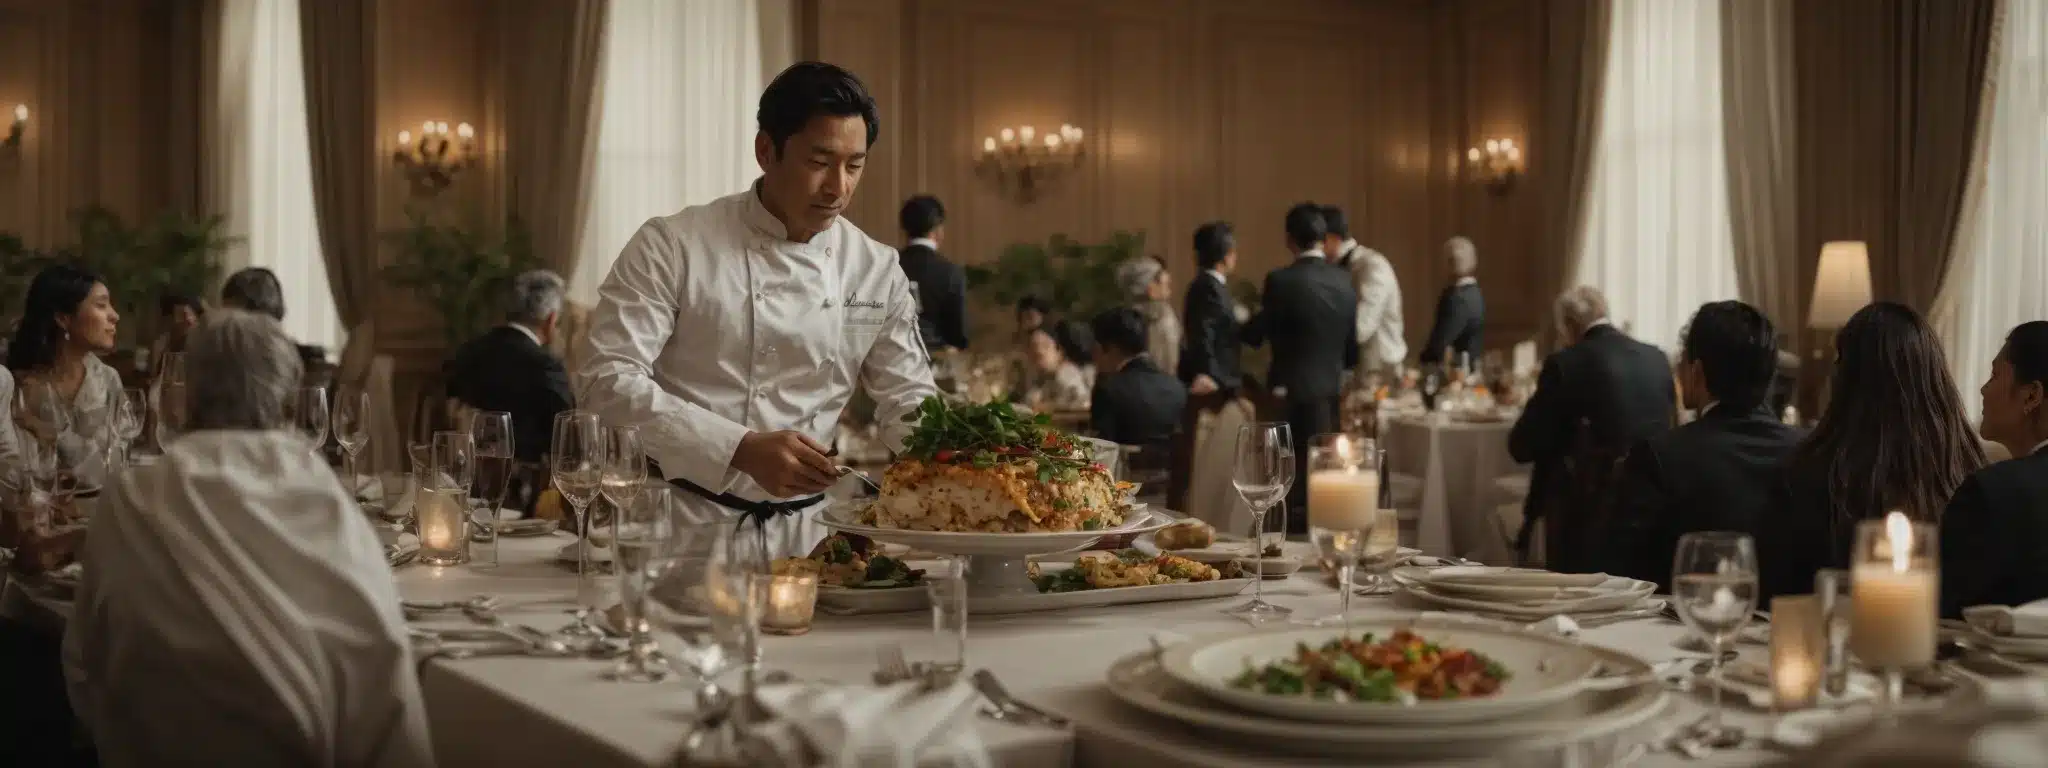 A Master Chef Presents A Sumptuous Dish To Delighted Diners In An Elegant Restaurant Setting.